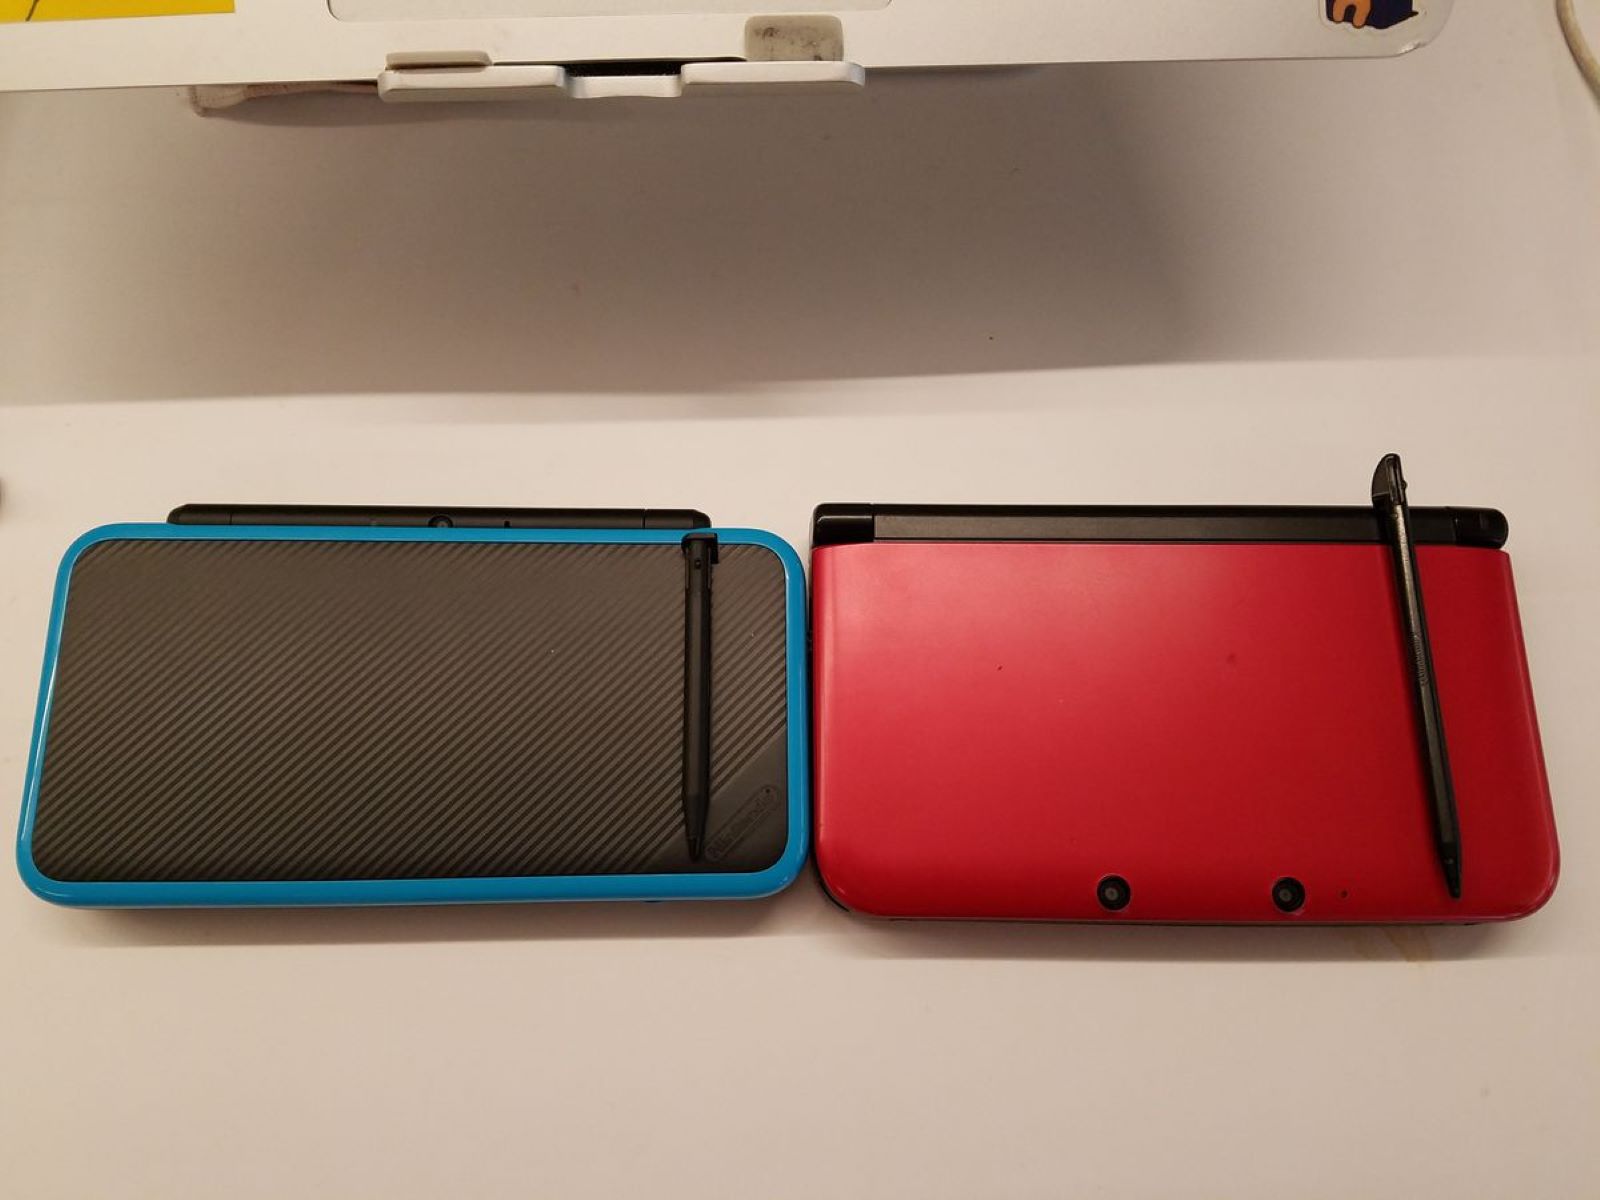 3DS XL Stylus Spotting: Finding The Essential Tool